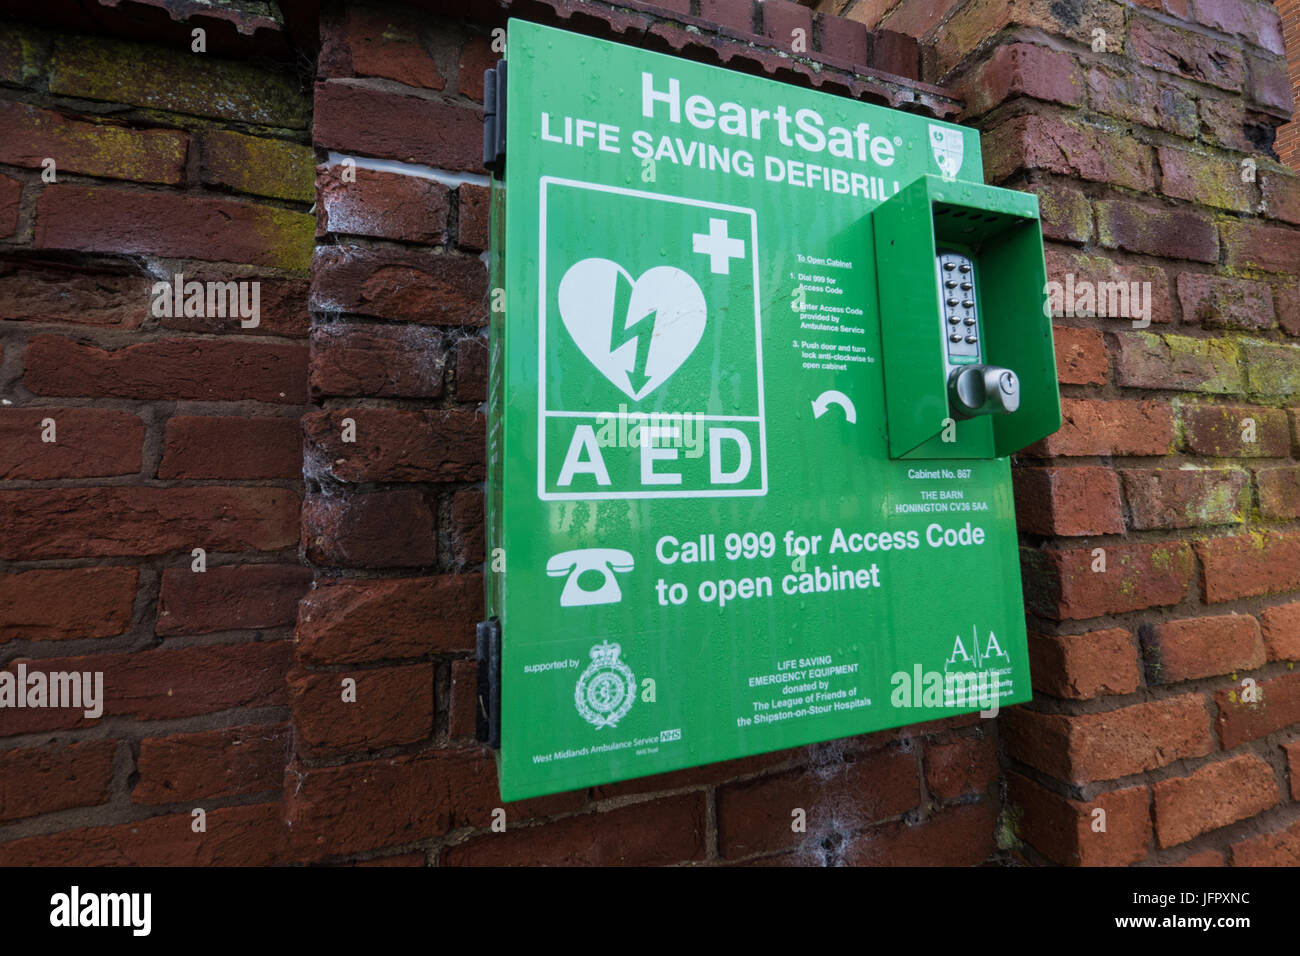 Wall mounted defibrillator for emergency use in times of heart failure or cardiac arrest. Stock Photo